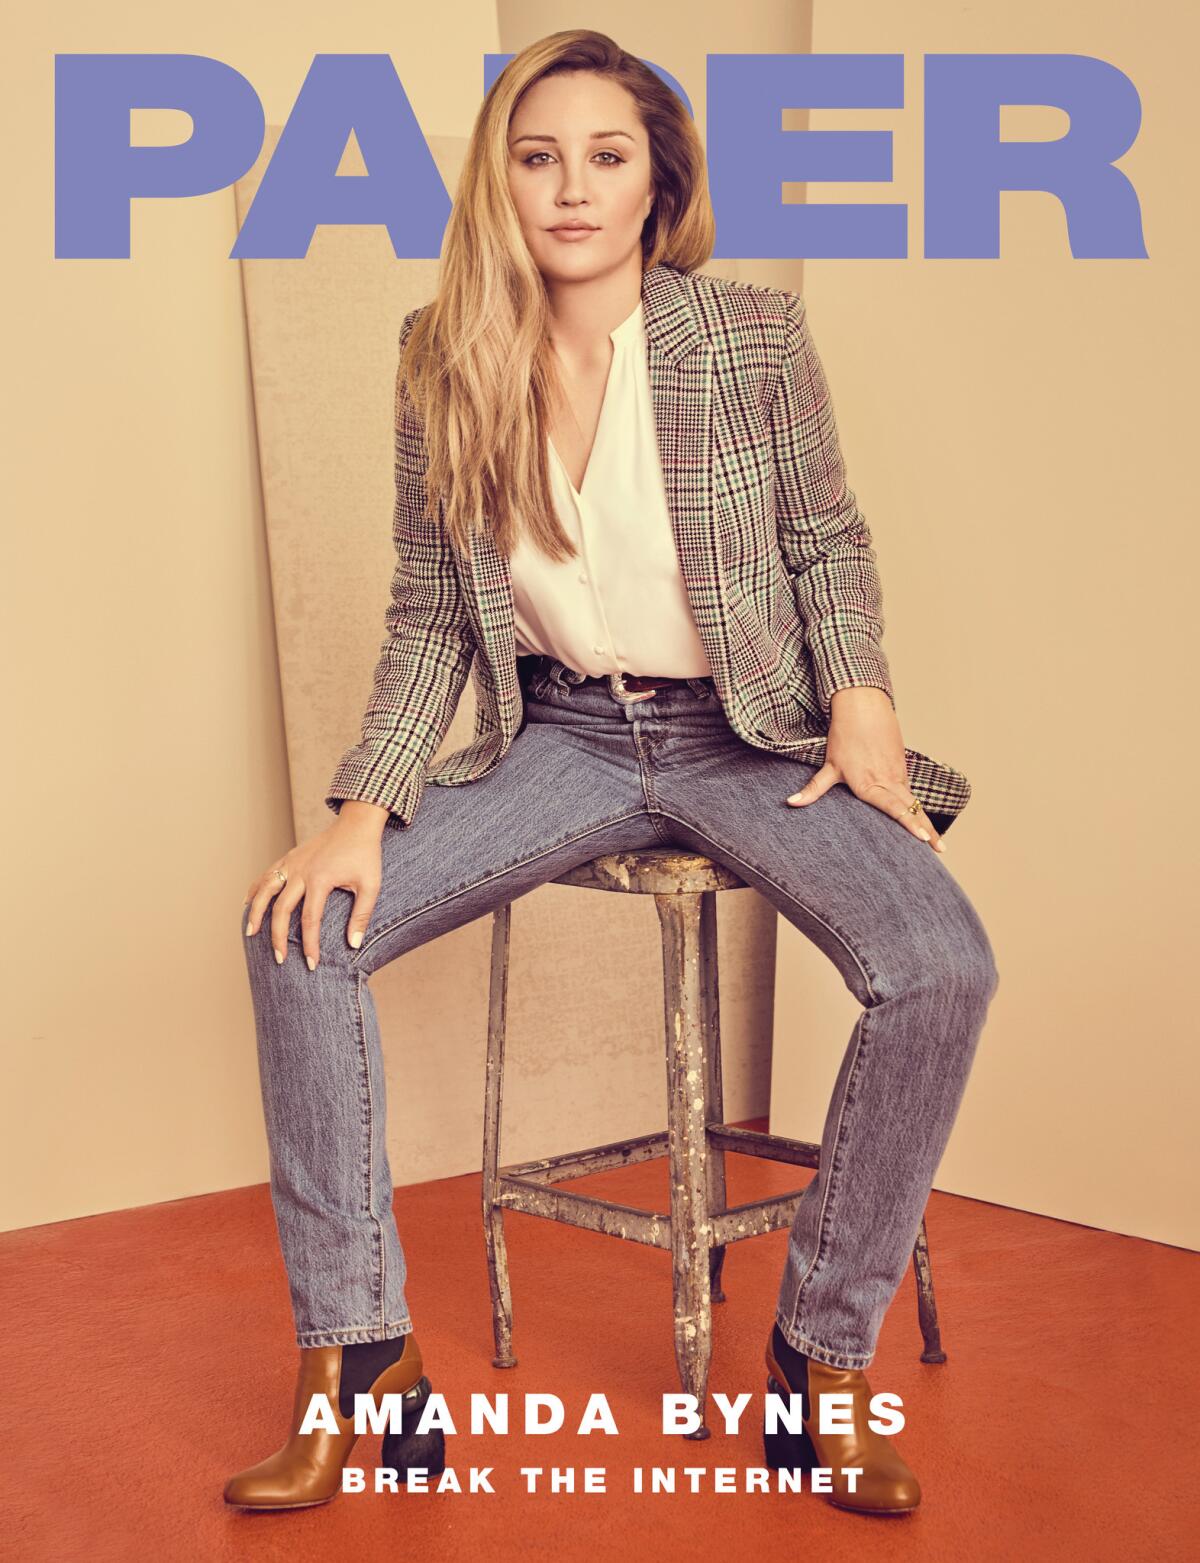 Amanda Bynes on the cover of Paper magazine's "Break the Internet" issue.